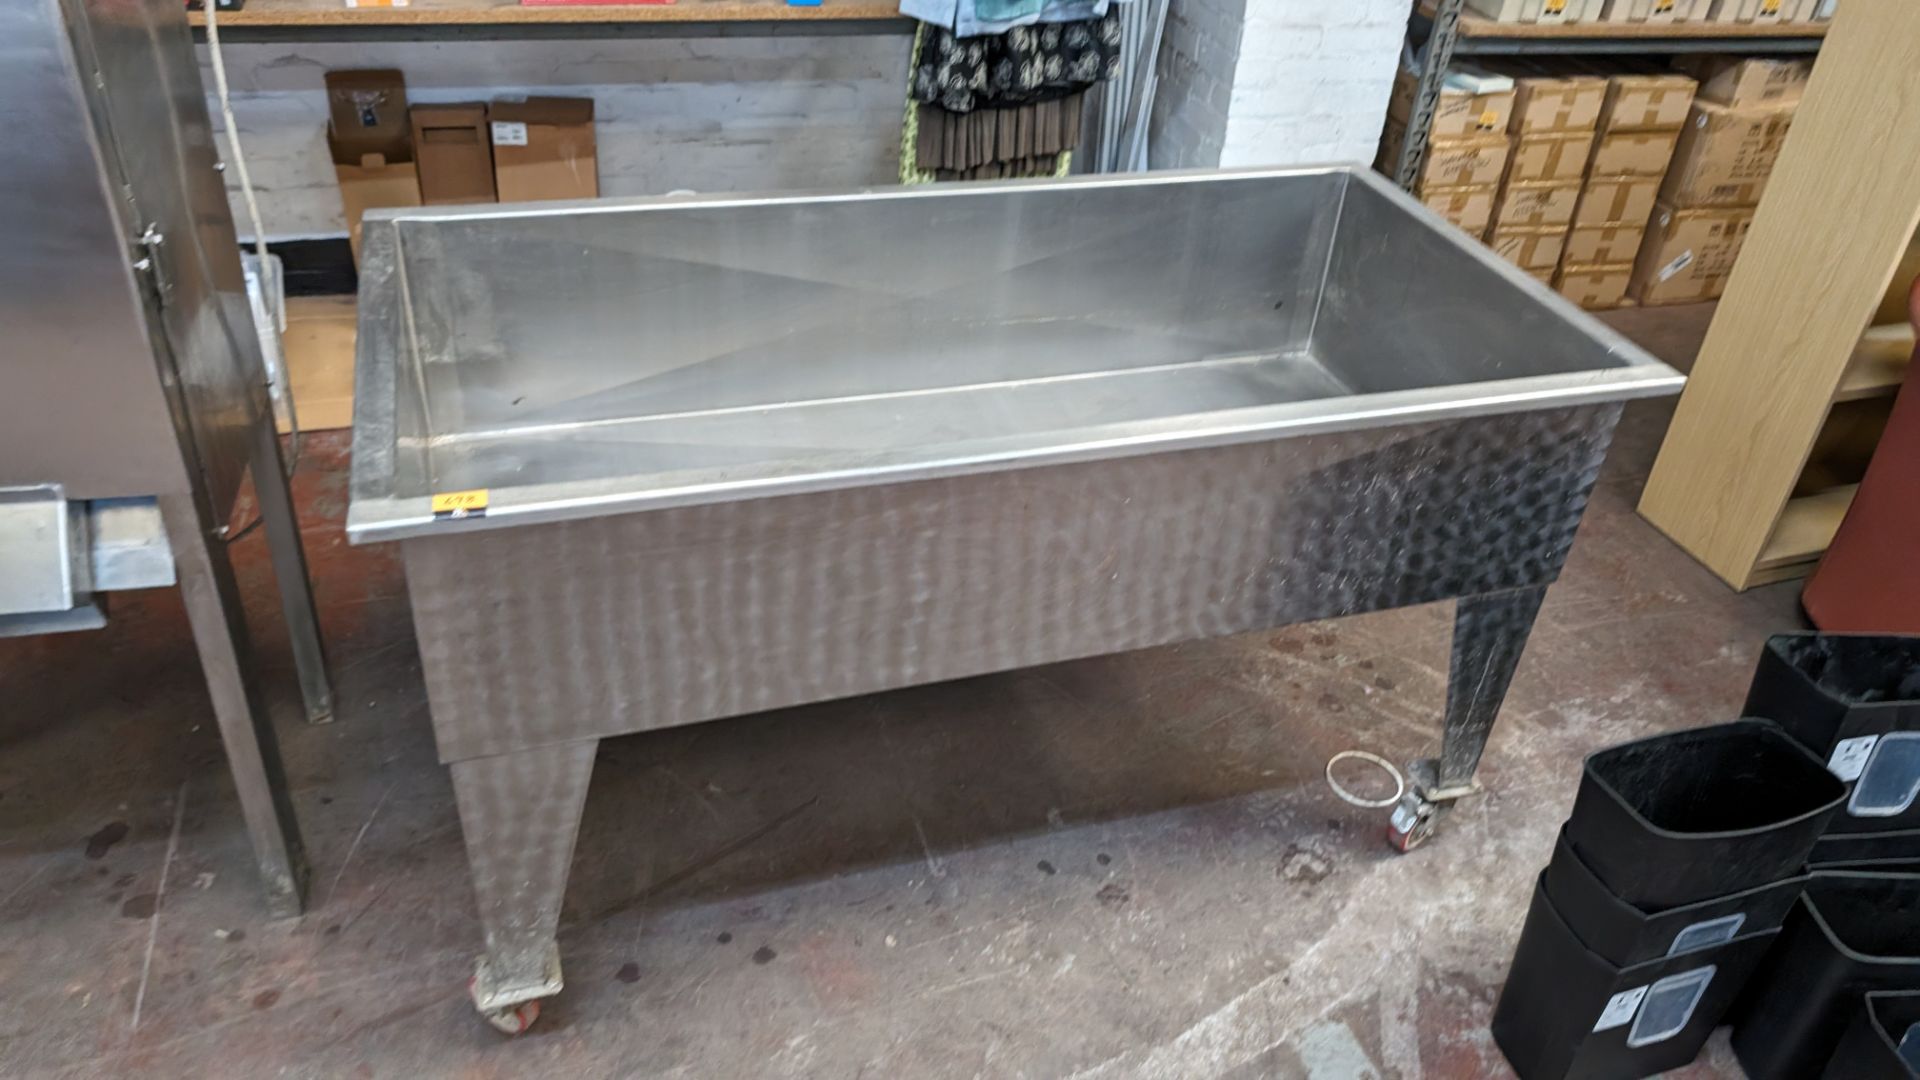 Mobile mozzarella hardening tank. Understood to have been bought in 2018 - Image 2 of 11